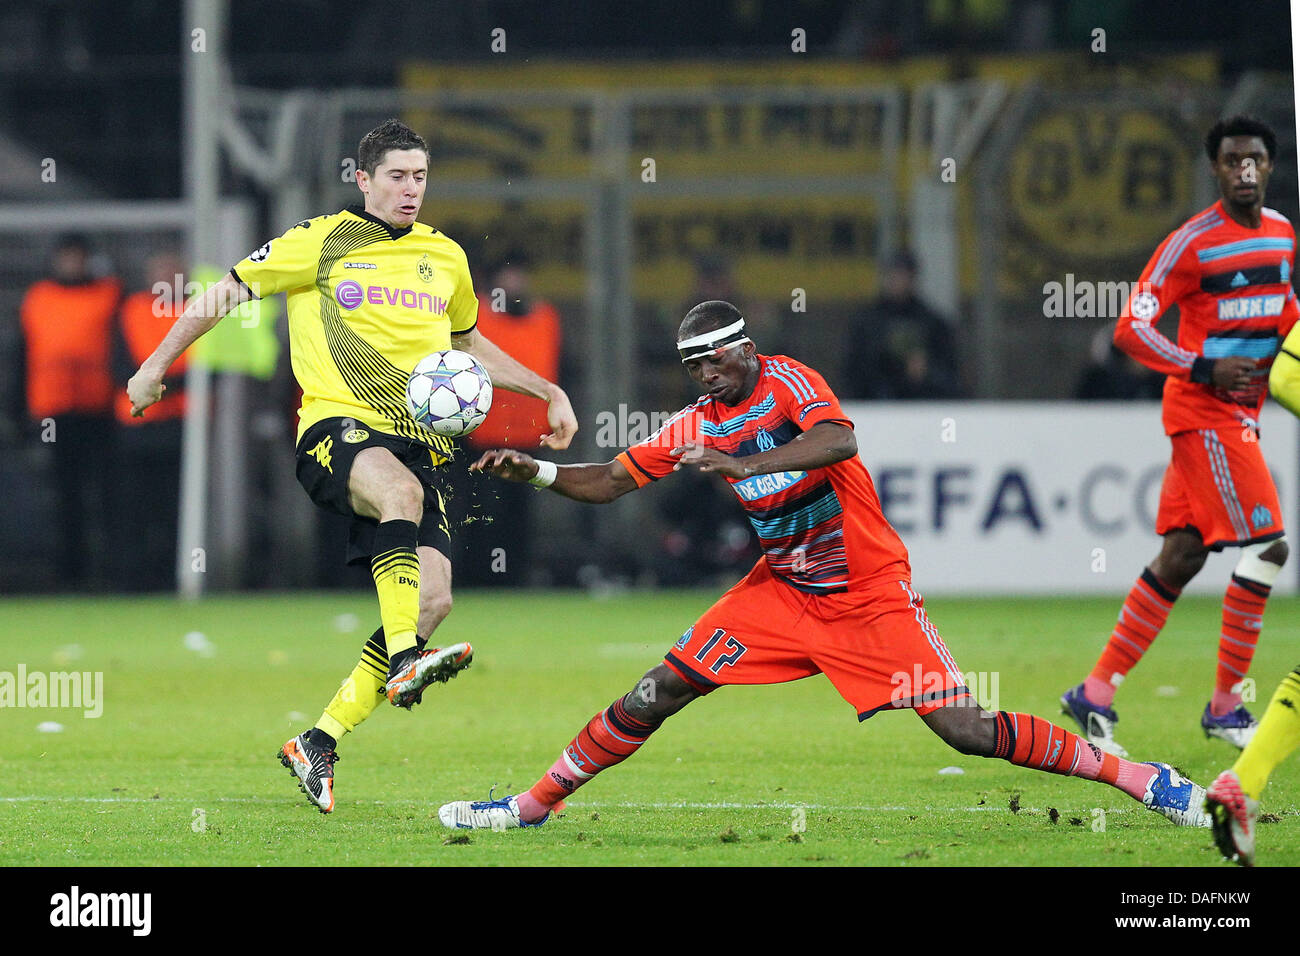 Dortmund's player Robert Lewandowski (L) vies for the ball with Marseille's Stephane Mbia  during the Champions League soccer match between Borussia Dortmund and Olympique Marseille at the Iduna Park stadium in Dortmund, Germany, 6 December 2011.  Photo: Revierfoto Stock Photo